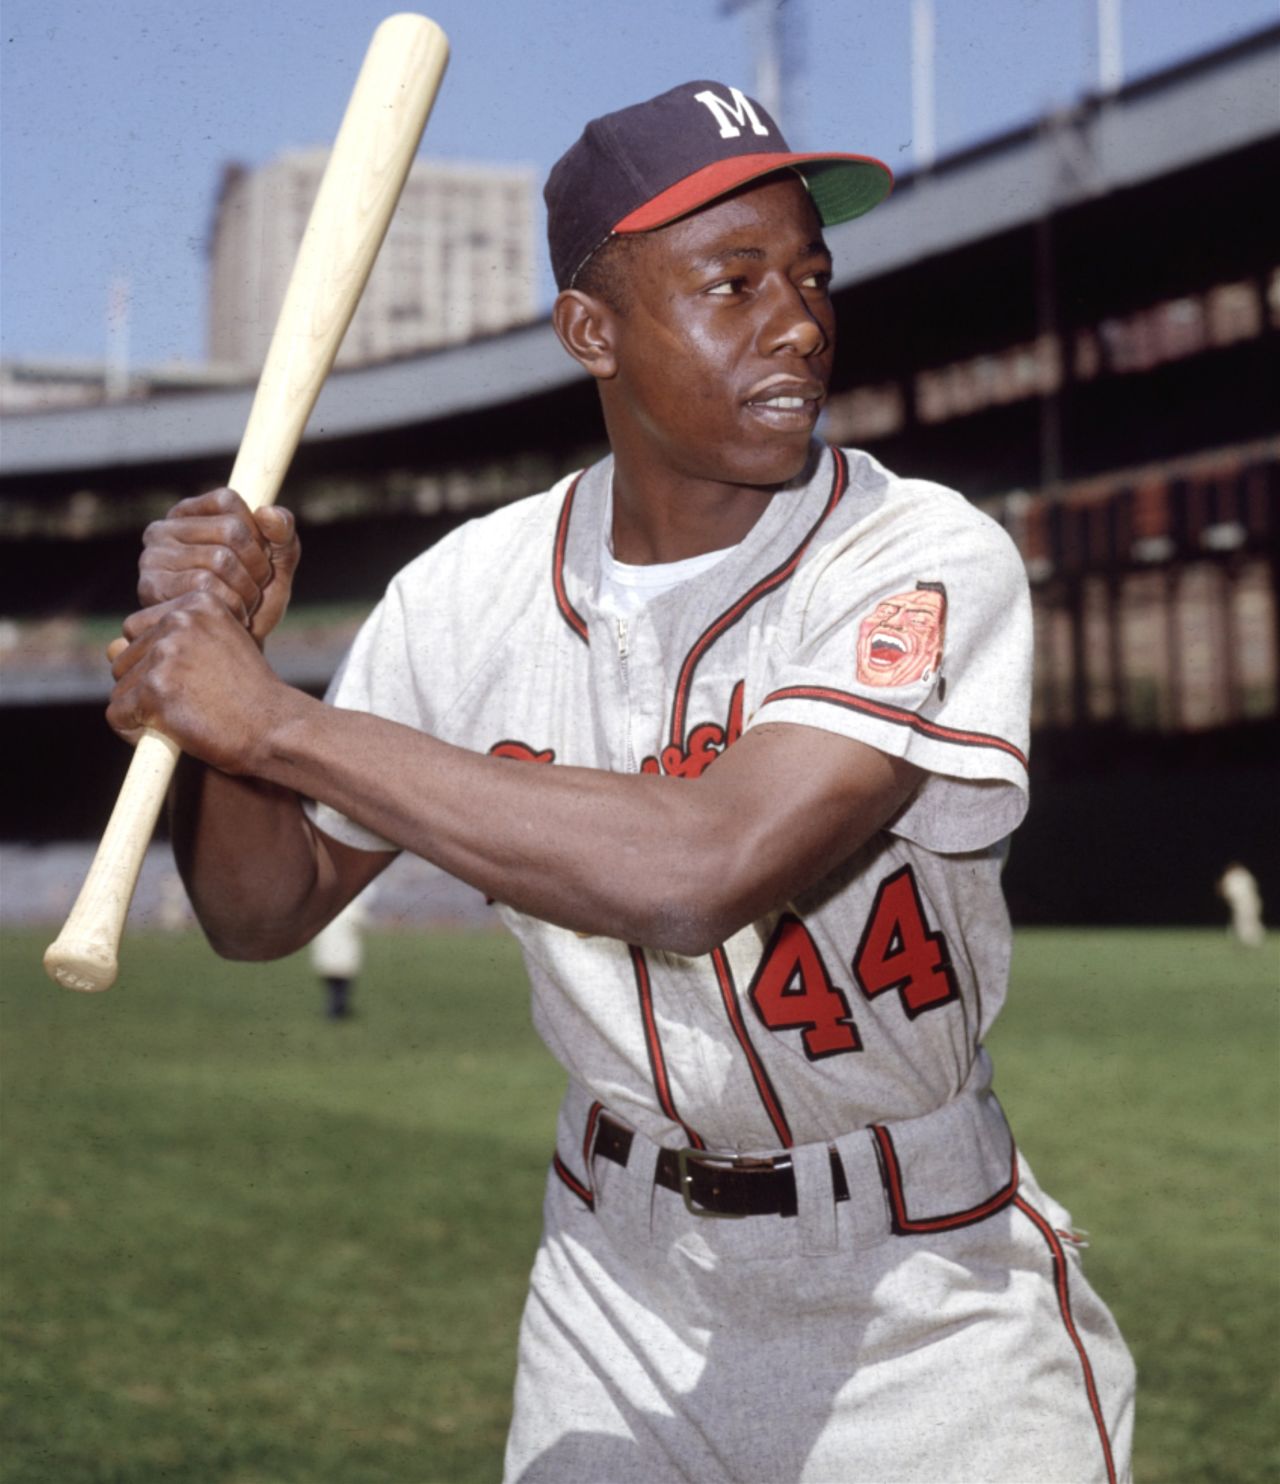 <a href="https://www.cnn.com/2021/01/22/us/hank-aaron-dies-trnd/index.html" target="_blank">Hank Aaron,</a> the Baseball Hall of Famer who broke Babe Ruth's all-time home run record and lived a life as an ambassador to the game, died January 22 at the age of 86.